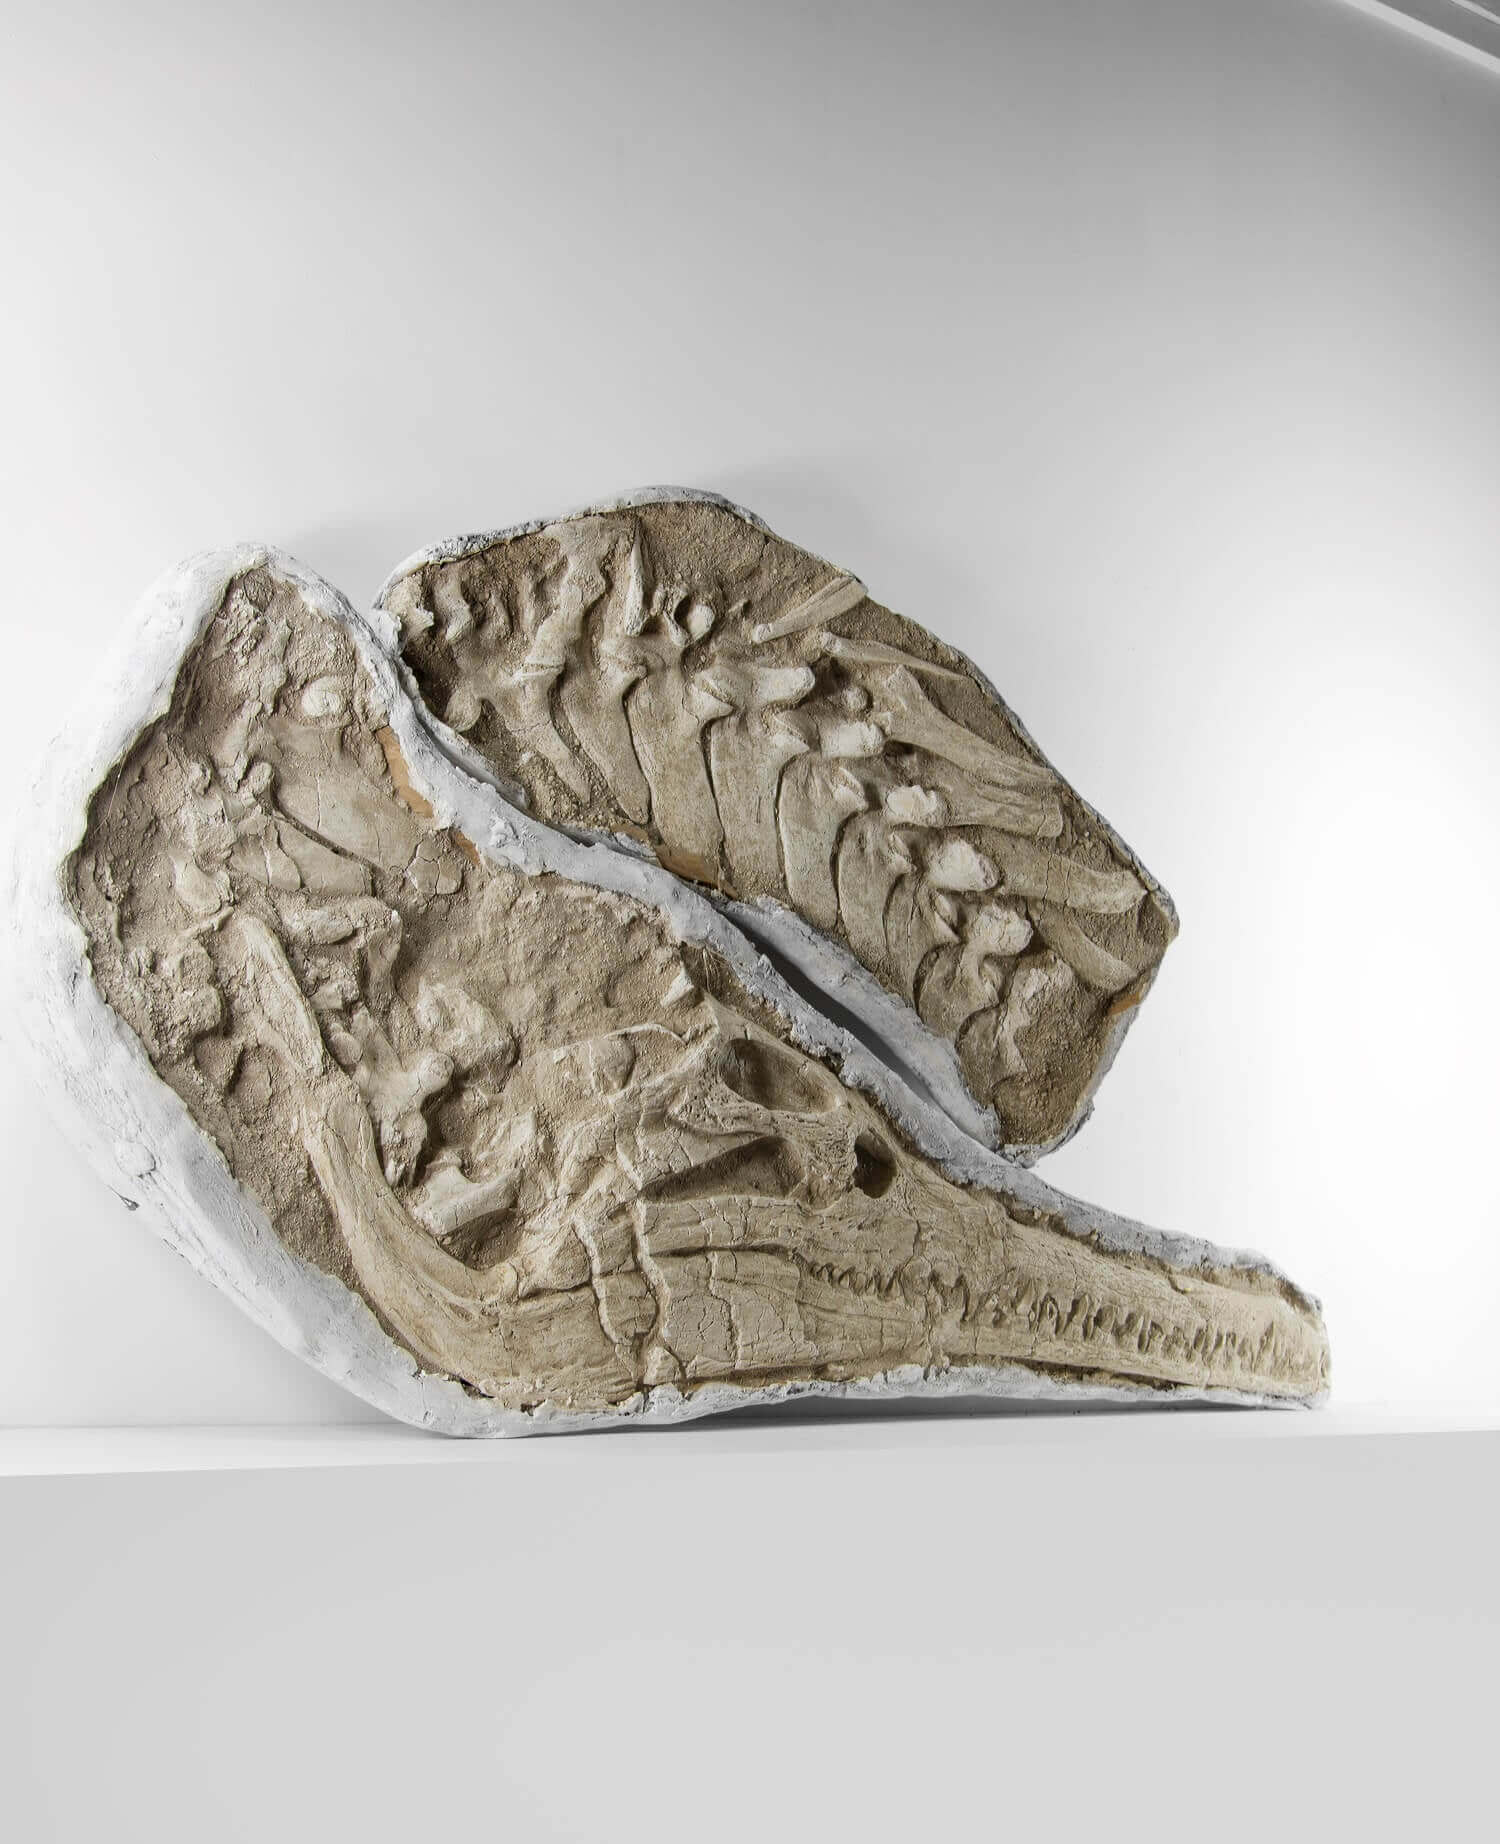 Highly important museum-quality Dyrosaurus Crocodile fossil Skull for sale measuring 1.3 meters